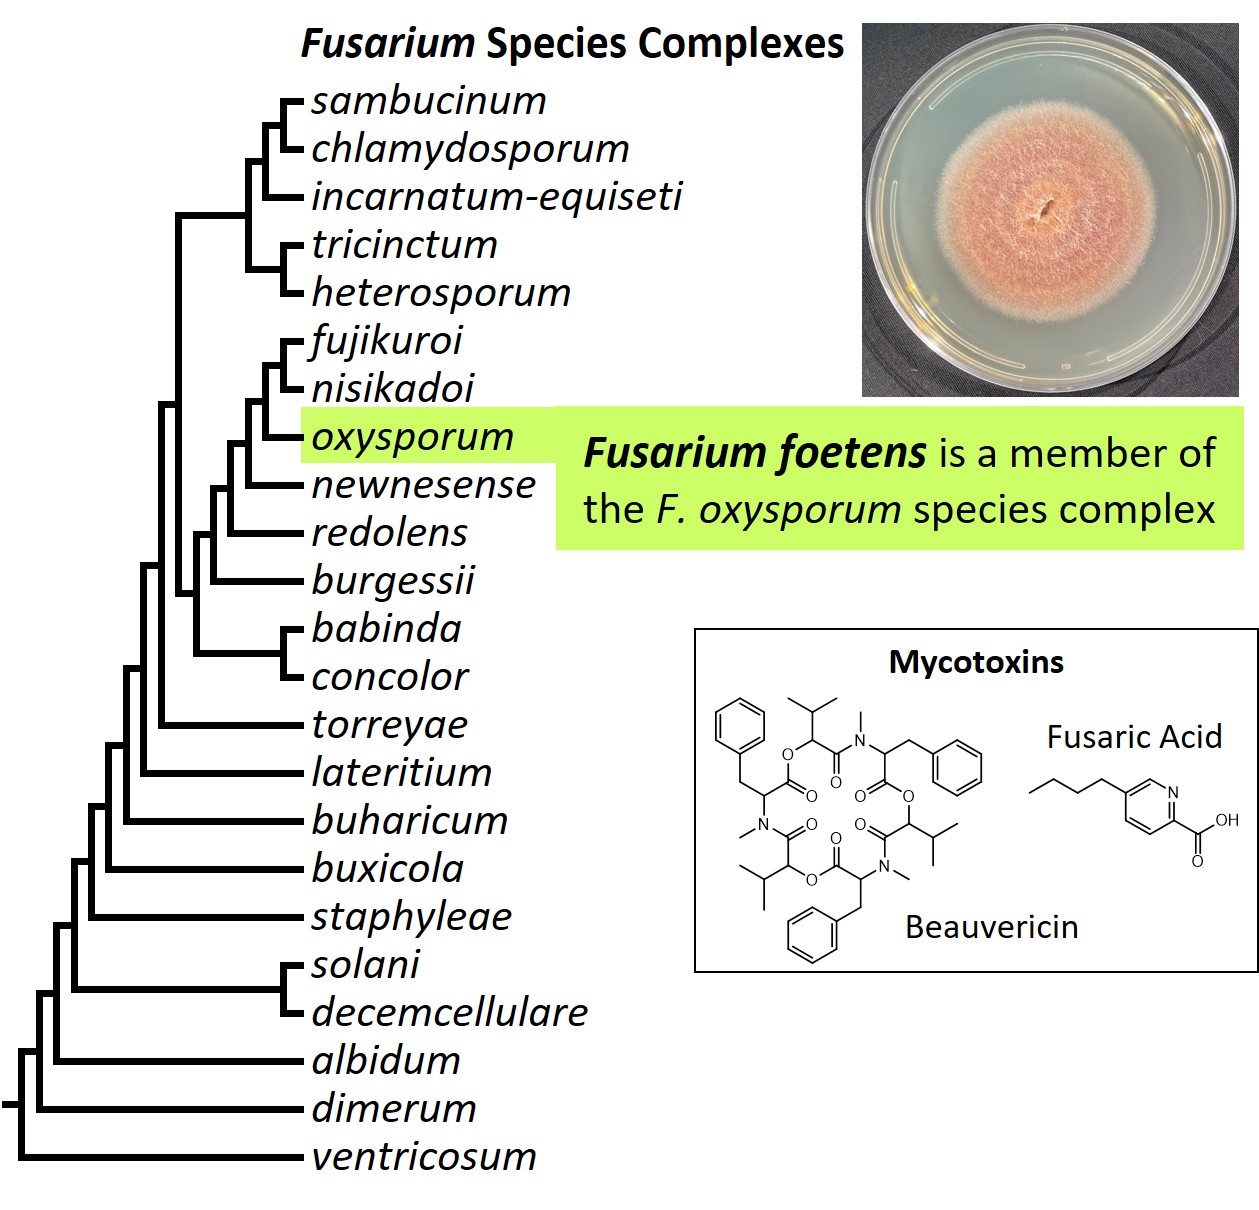 Left &ndash; tree showing phylogenetic relationships of the 23
Fusarium species complexes and placement of F. foetens within the
F. oxysporum species complex. In the tree, species complex names
are abbreviated using specific epithets of the species after which
the complexes are named (e.g., the F. sambucinum species complex is
abbreviated as sambucinum). Upper right &ndash; culture of F.
foetens NRRL 38302 growing on potato dextrose agar medium. Lower
right &ndash; chemical structures of beauvericin and fusaric acid,
two mycotoxins produced by F. foetens. Image credit: Robert H.
Proctor, Amy McGovern and Crystal Probyn.